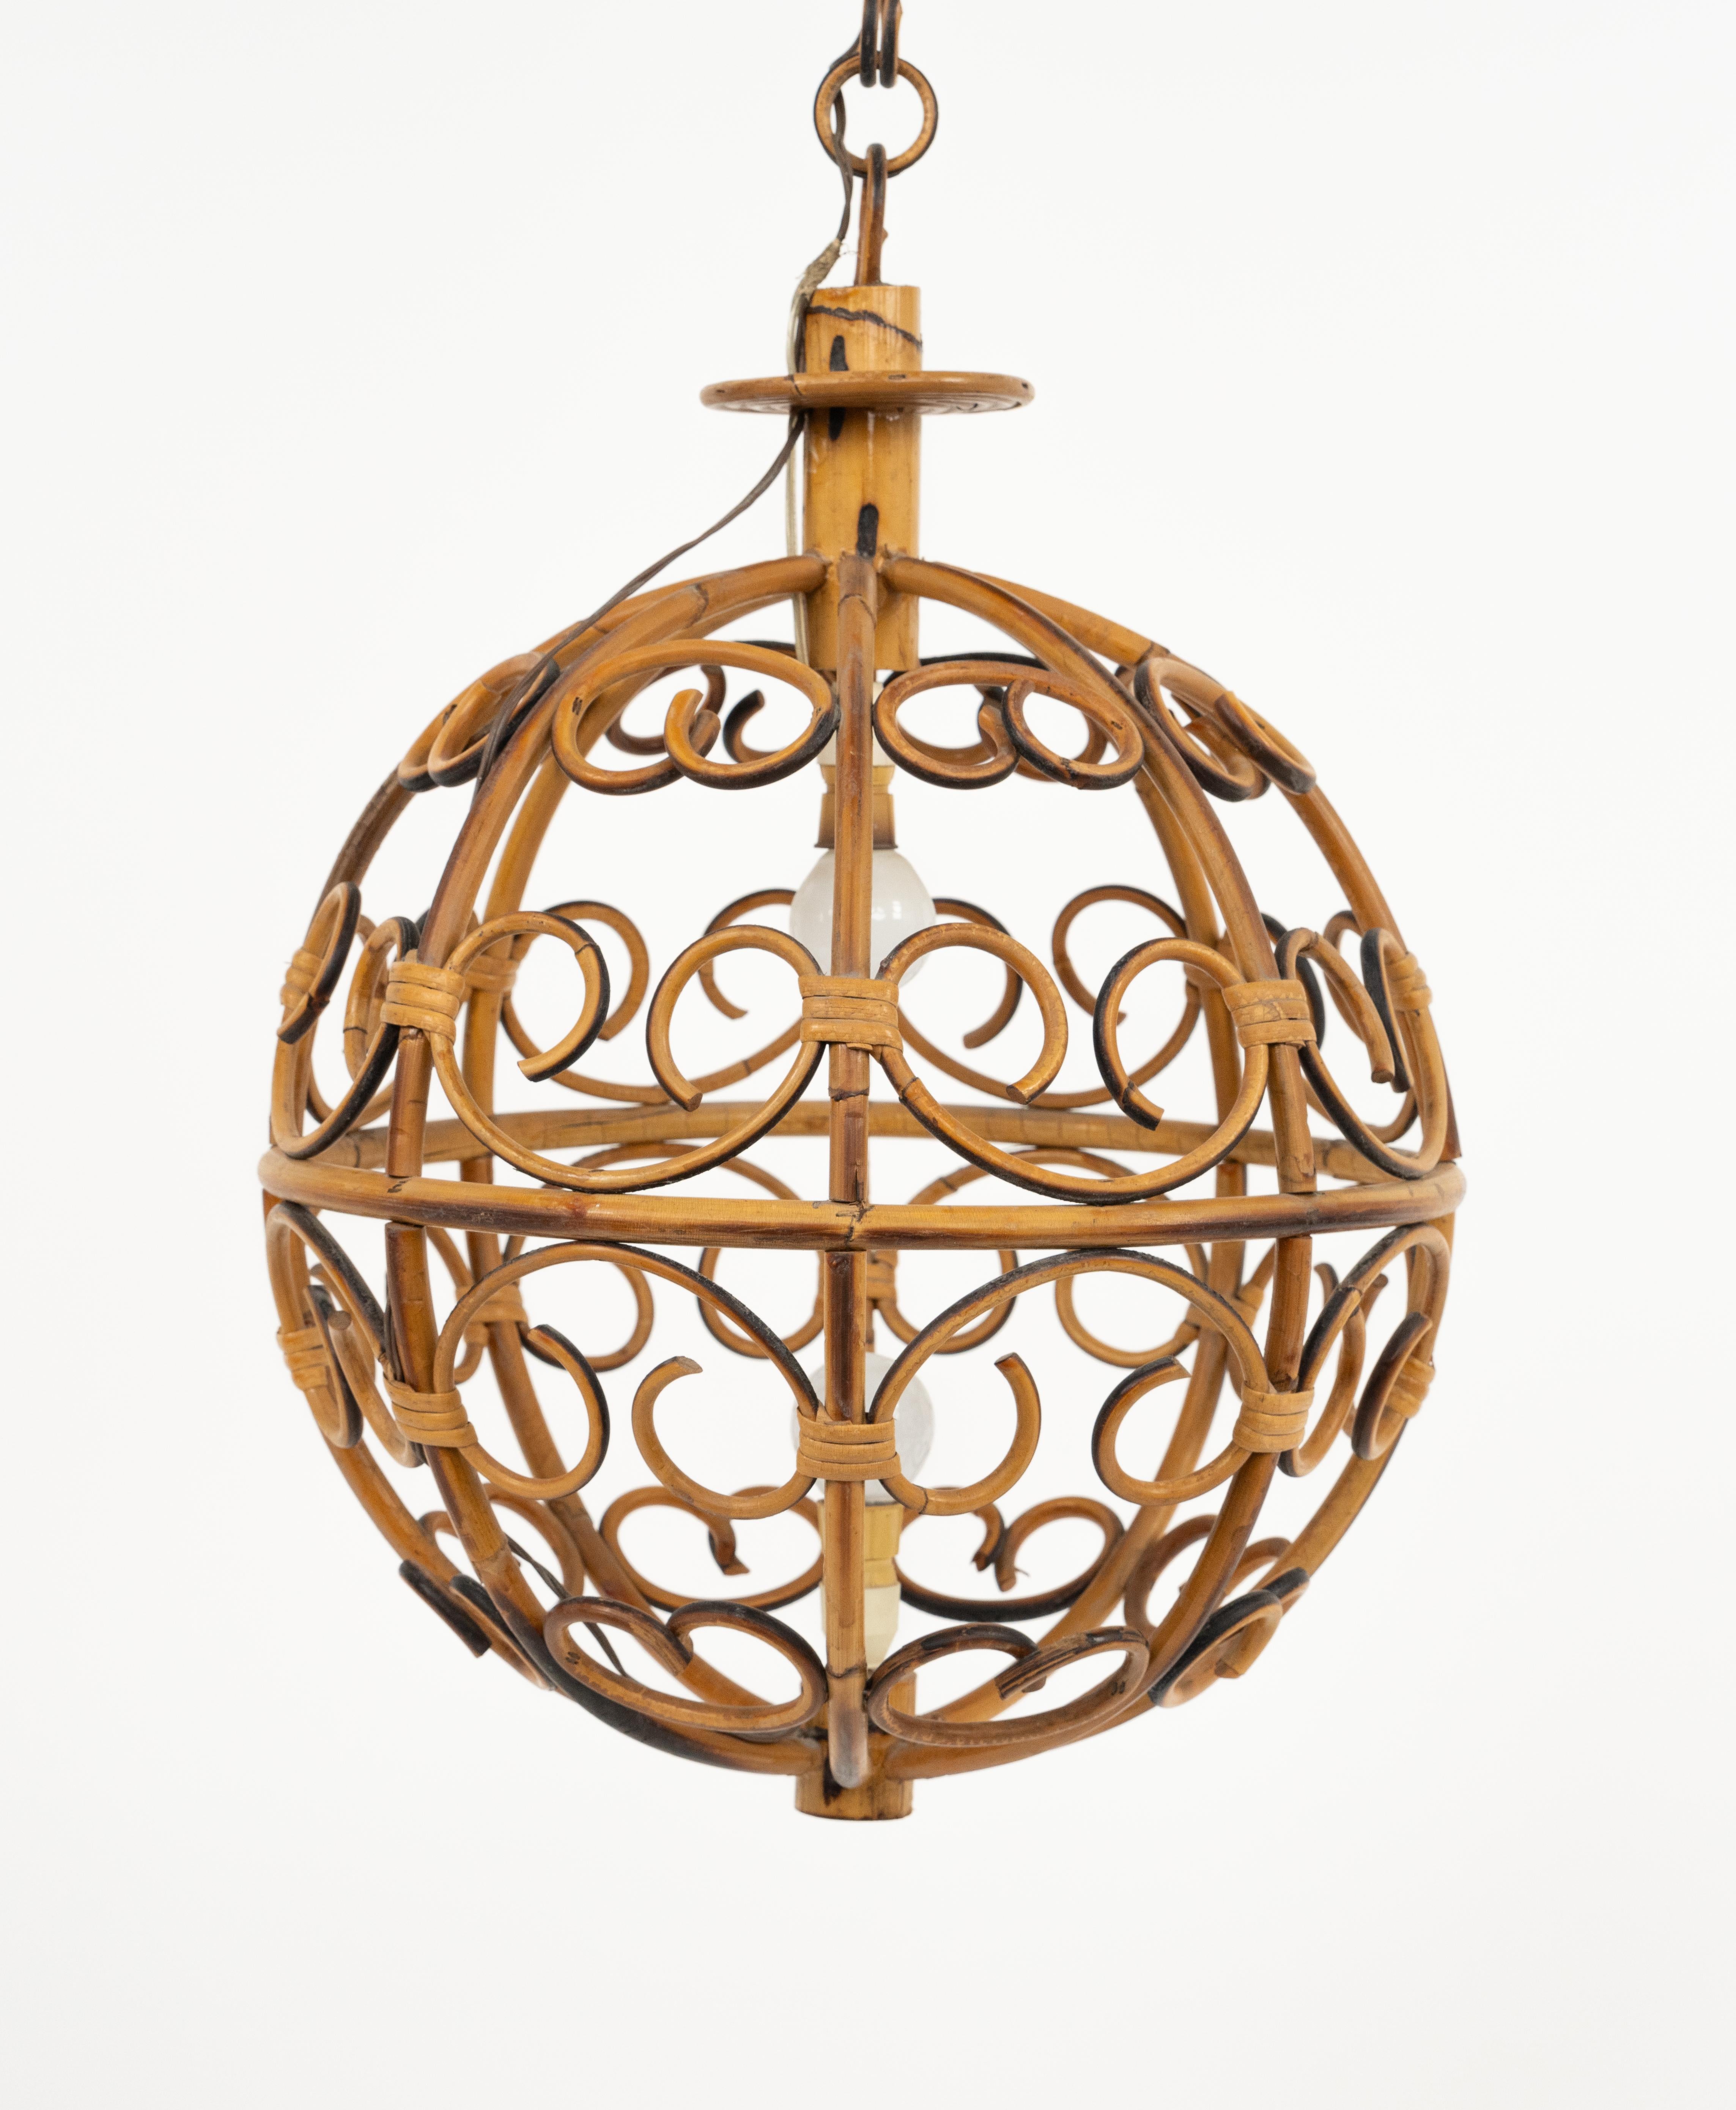 Midcentury Globe Chandelier in Rattan and Bamboo, Italy 1960s For Sale 1